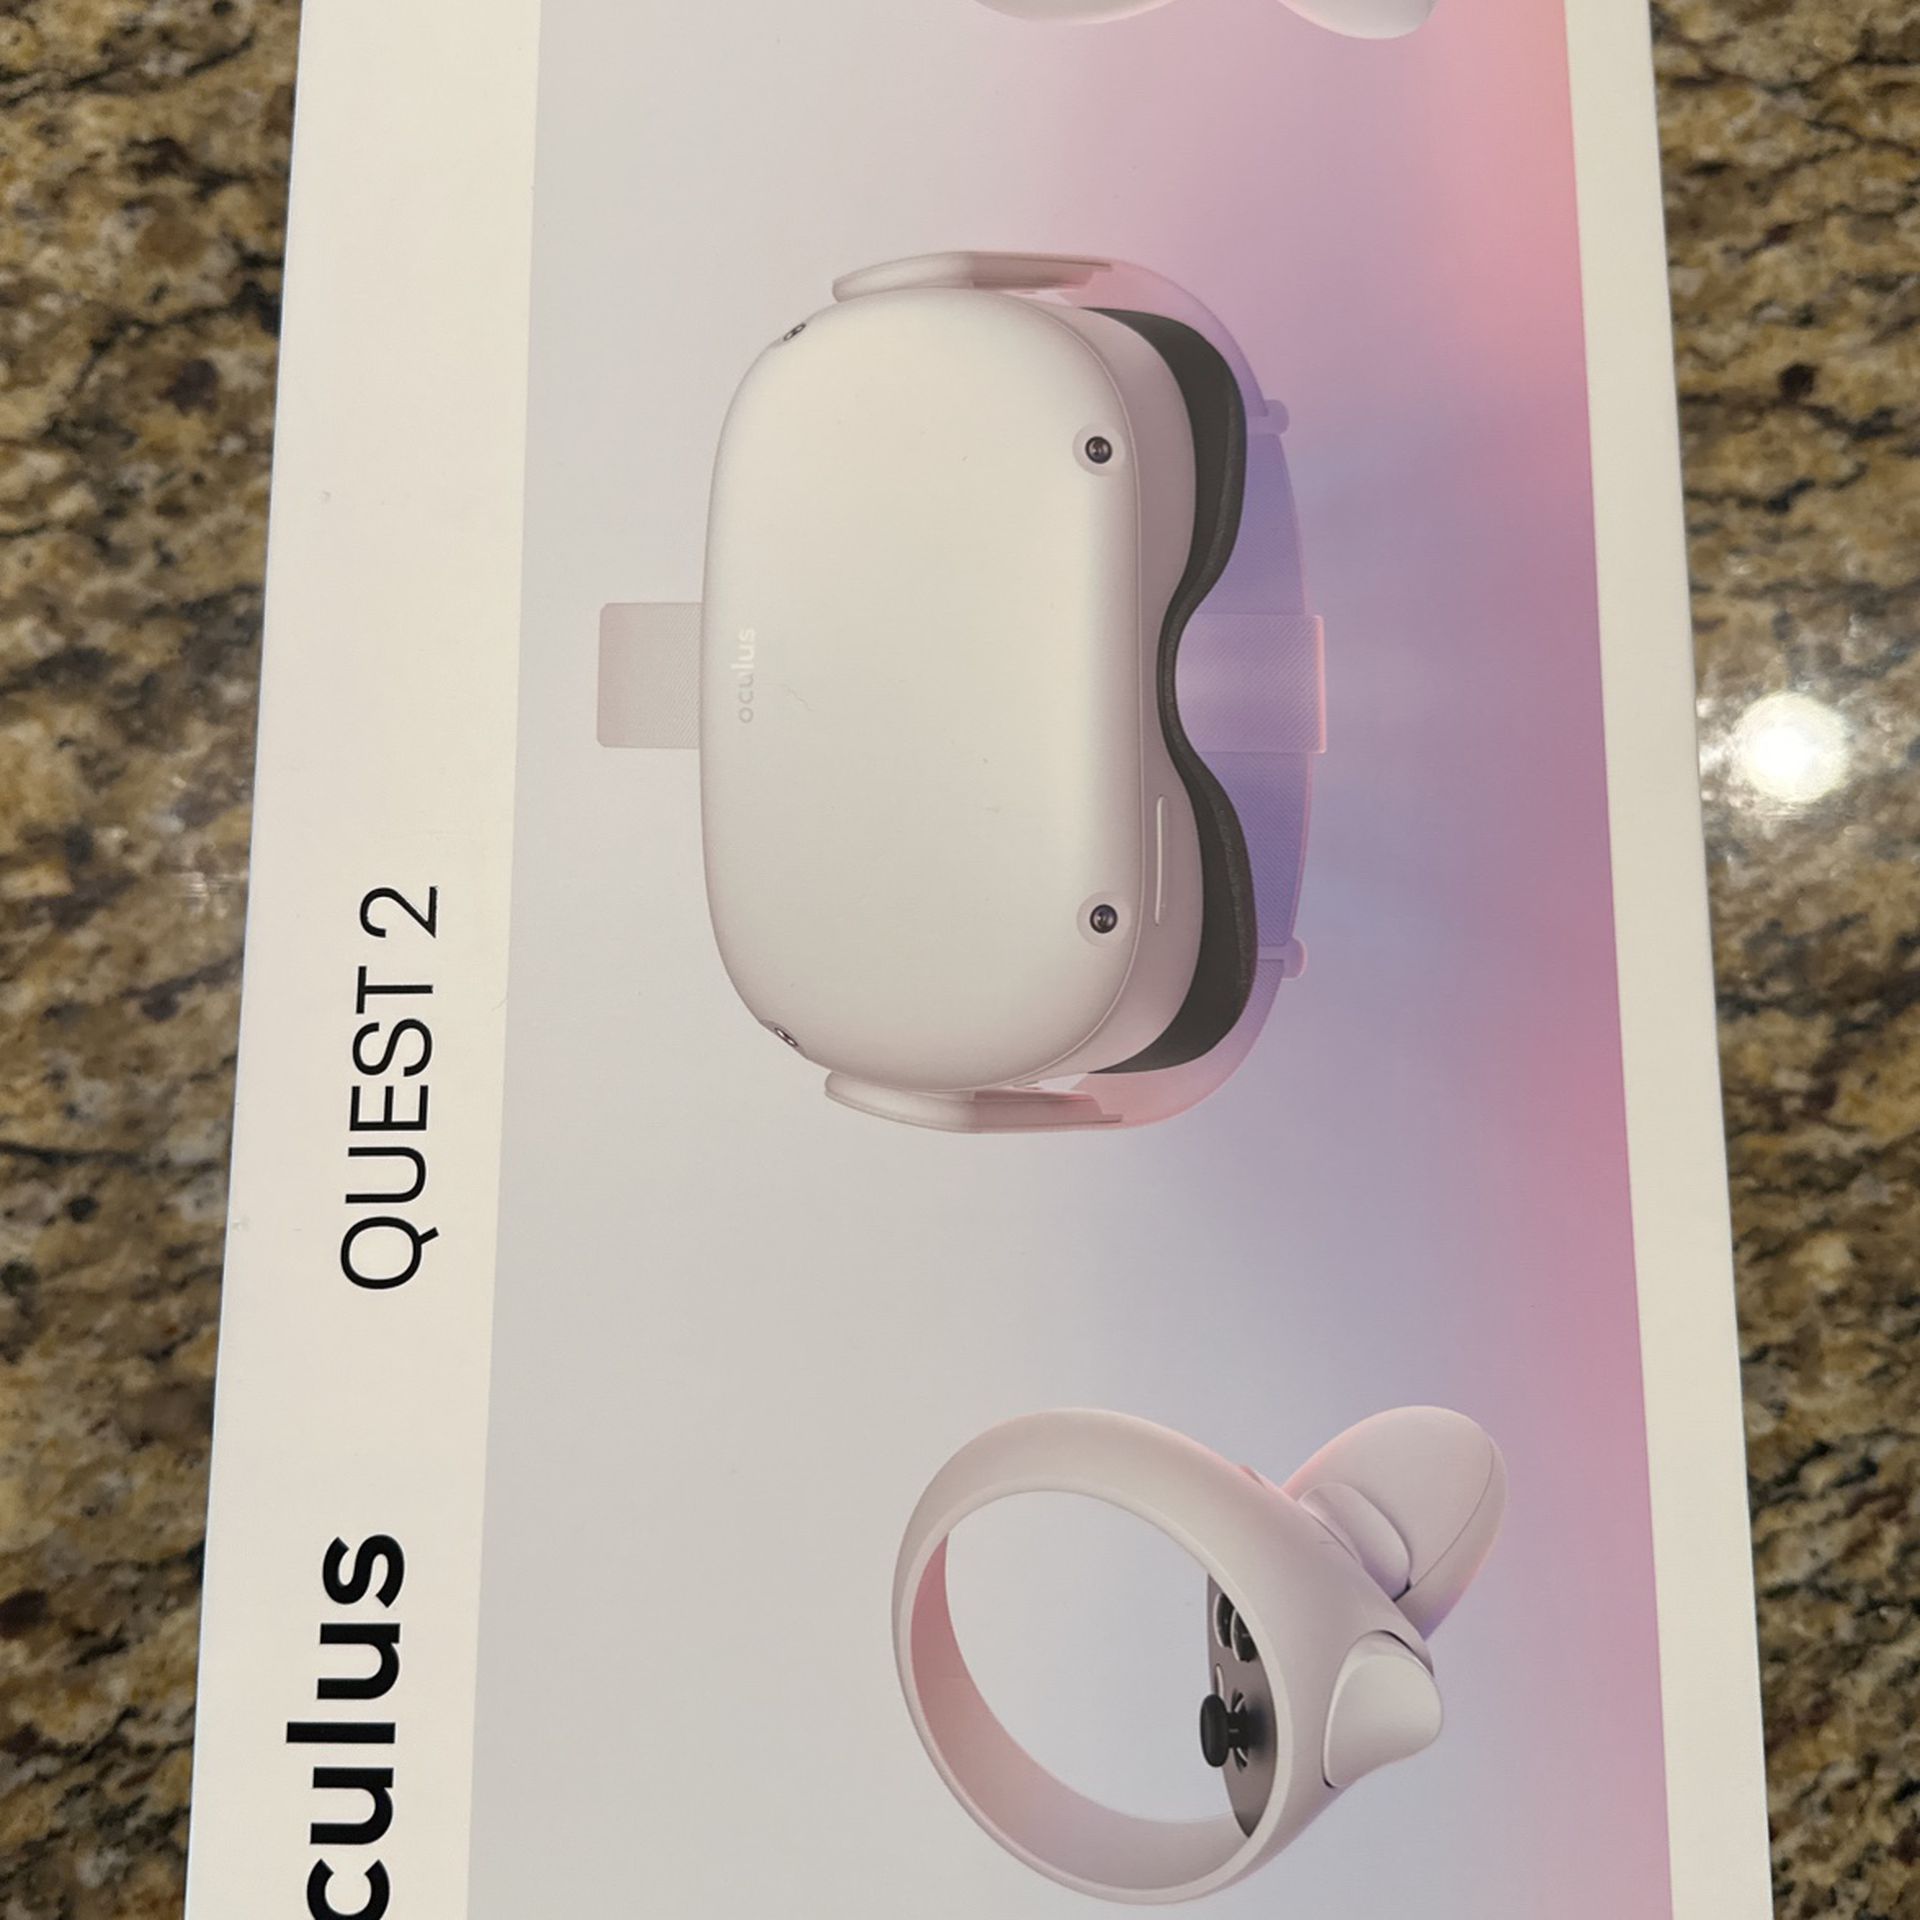 Oculus Quest 2 256 GB for Sale in Katy, TX - OfferUp